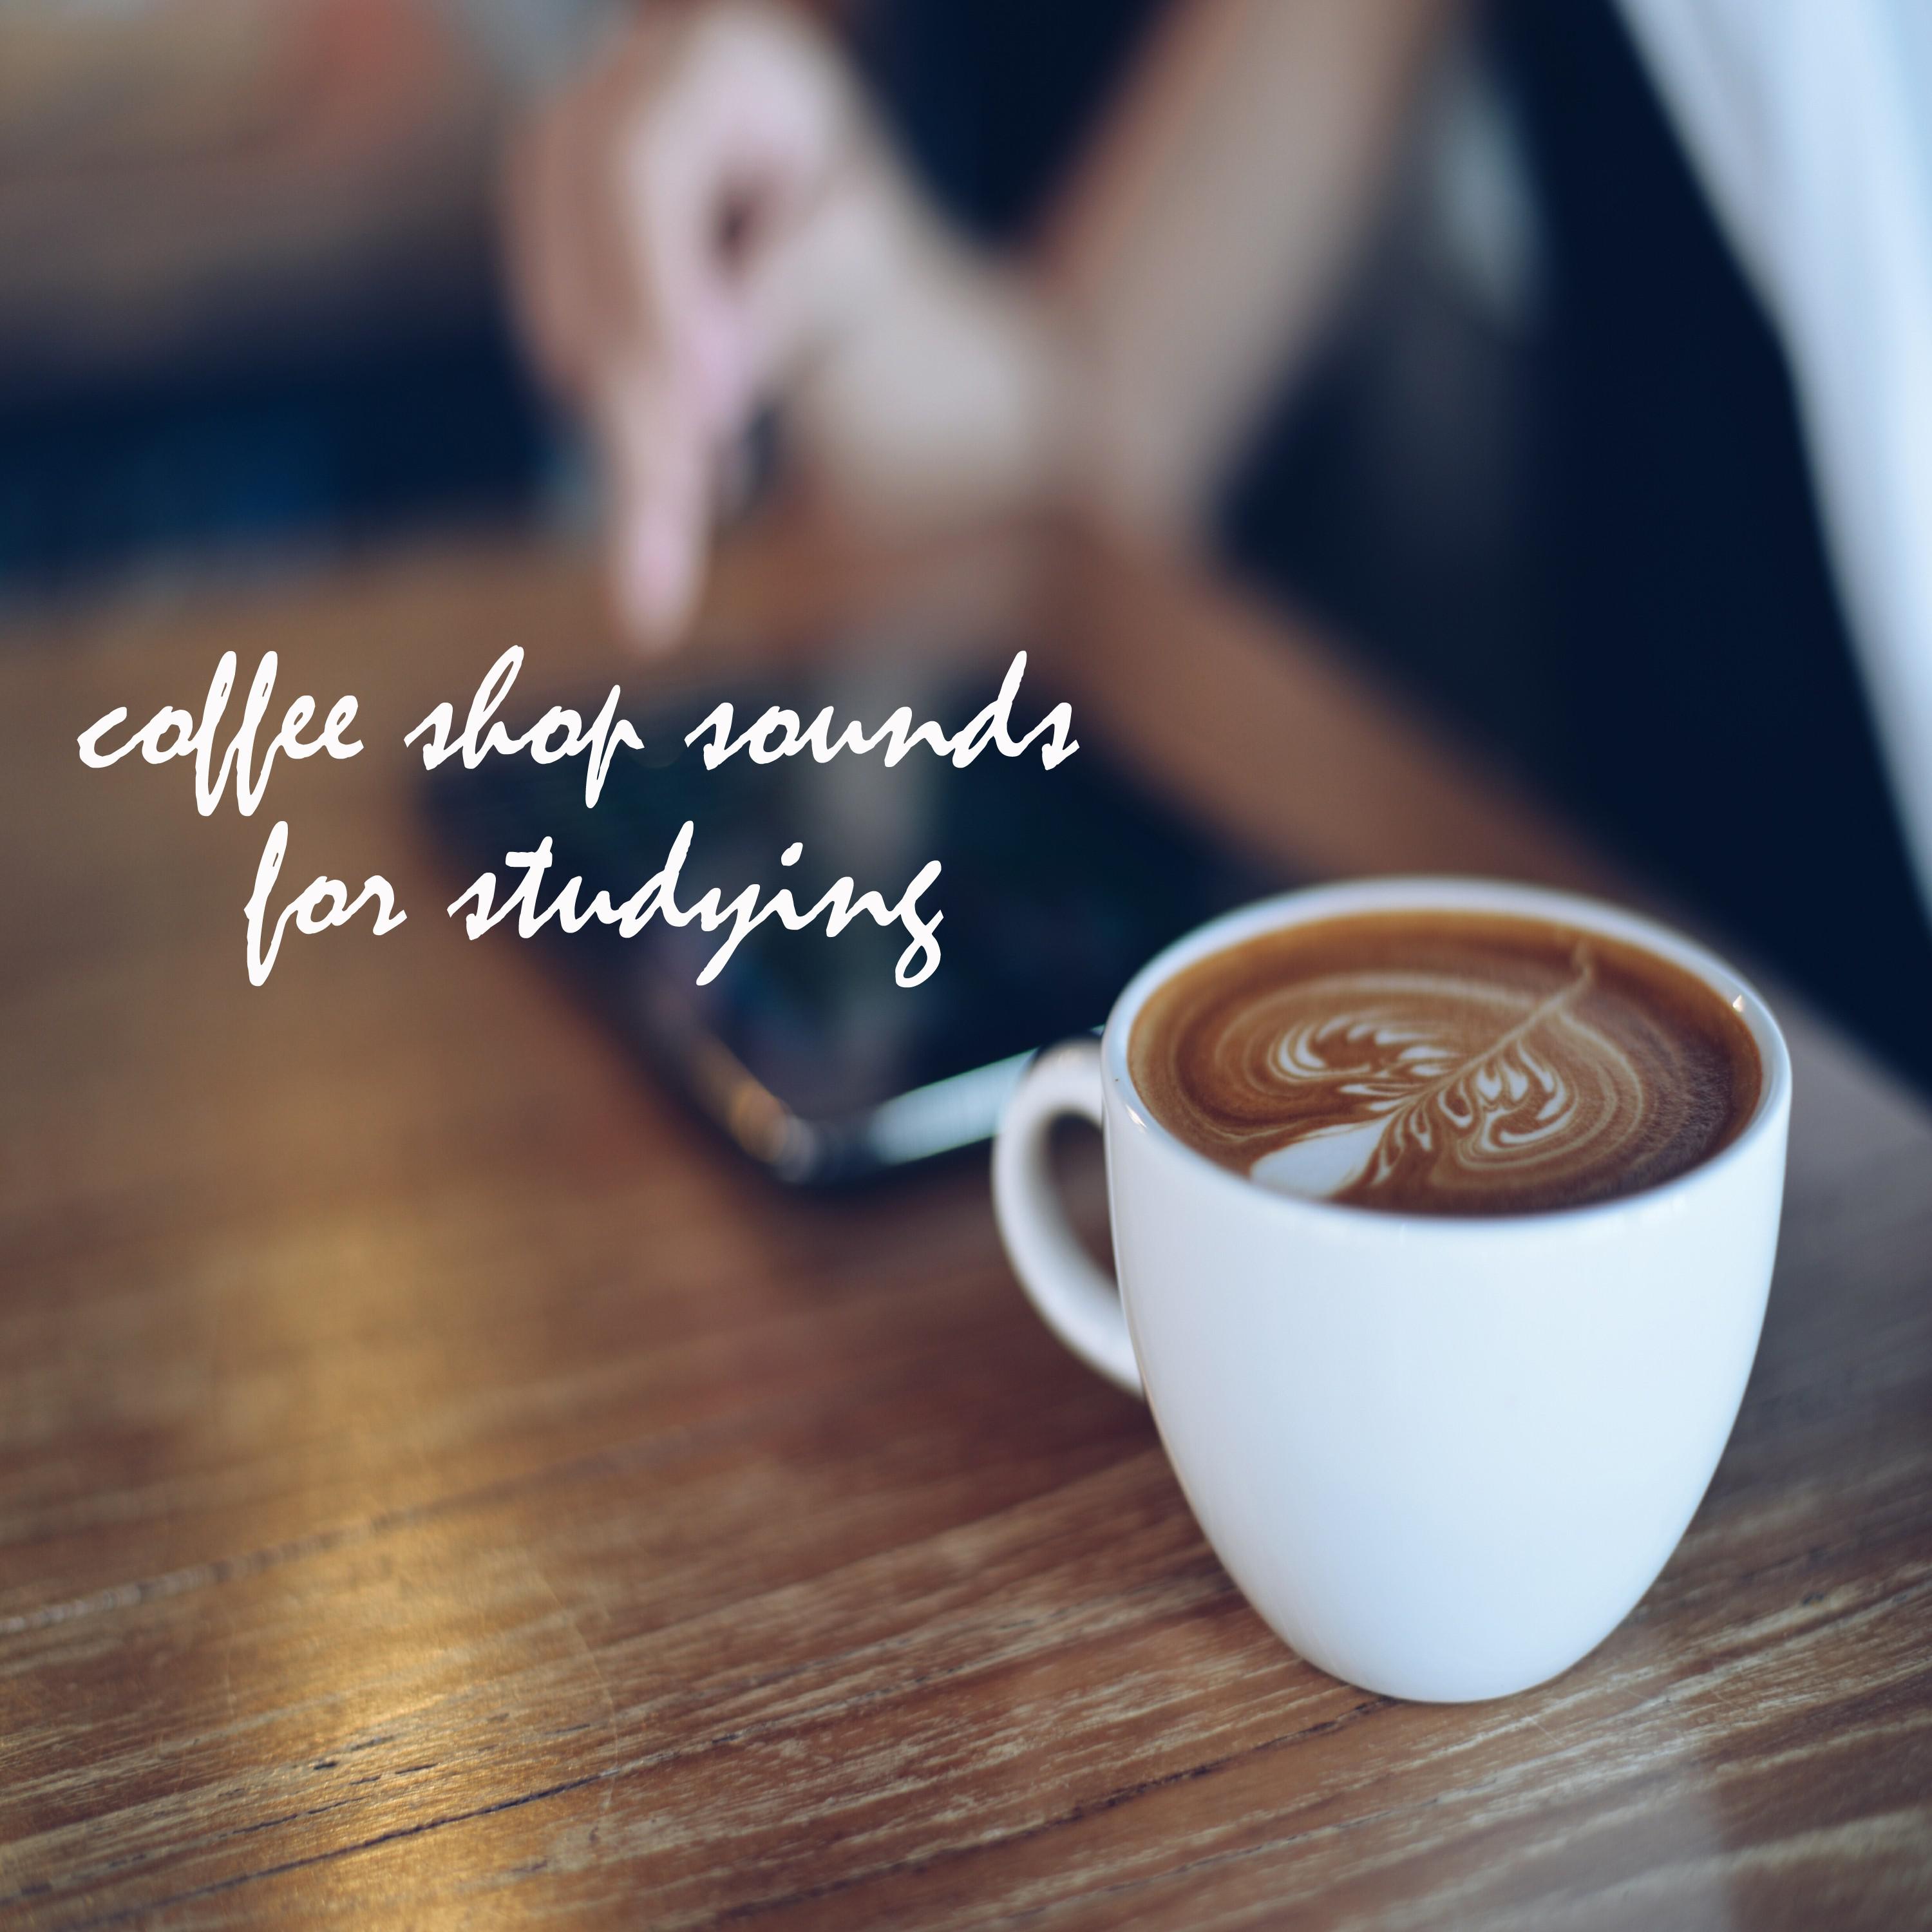 Coffee Shop Sounds for Studying and Working, Pt. 20